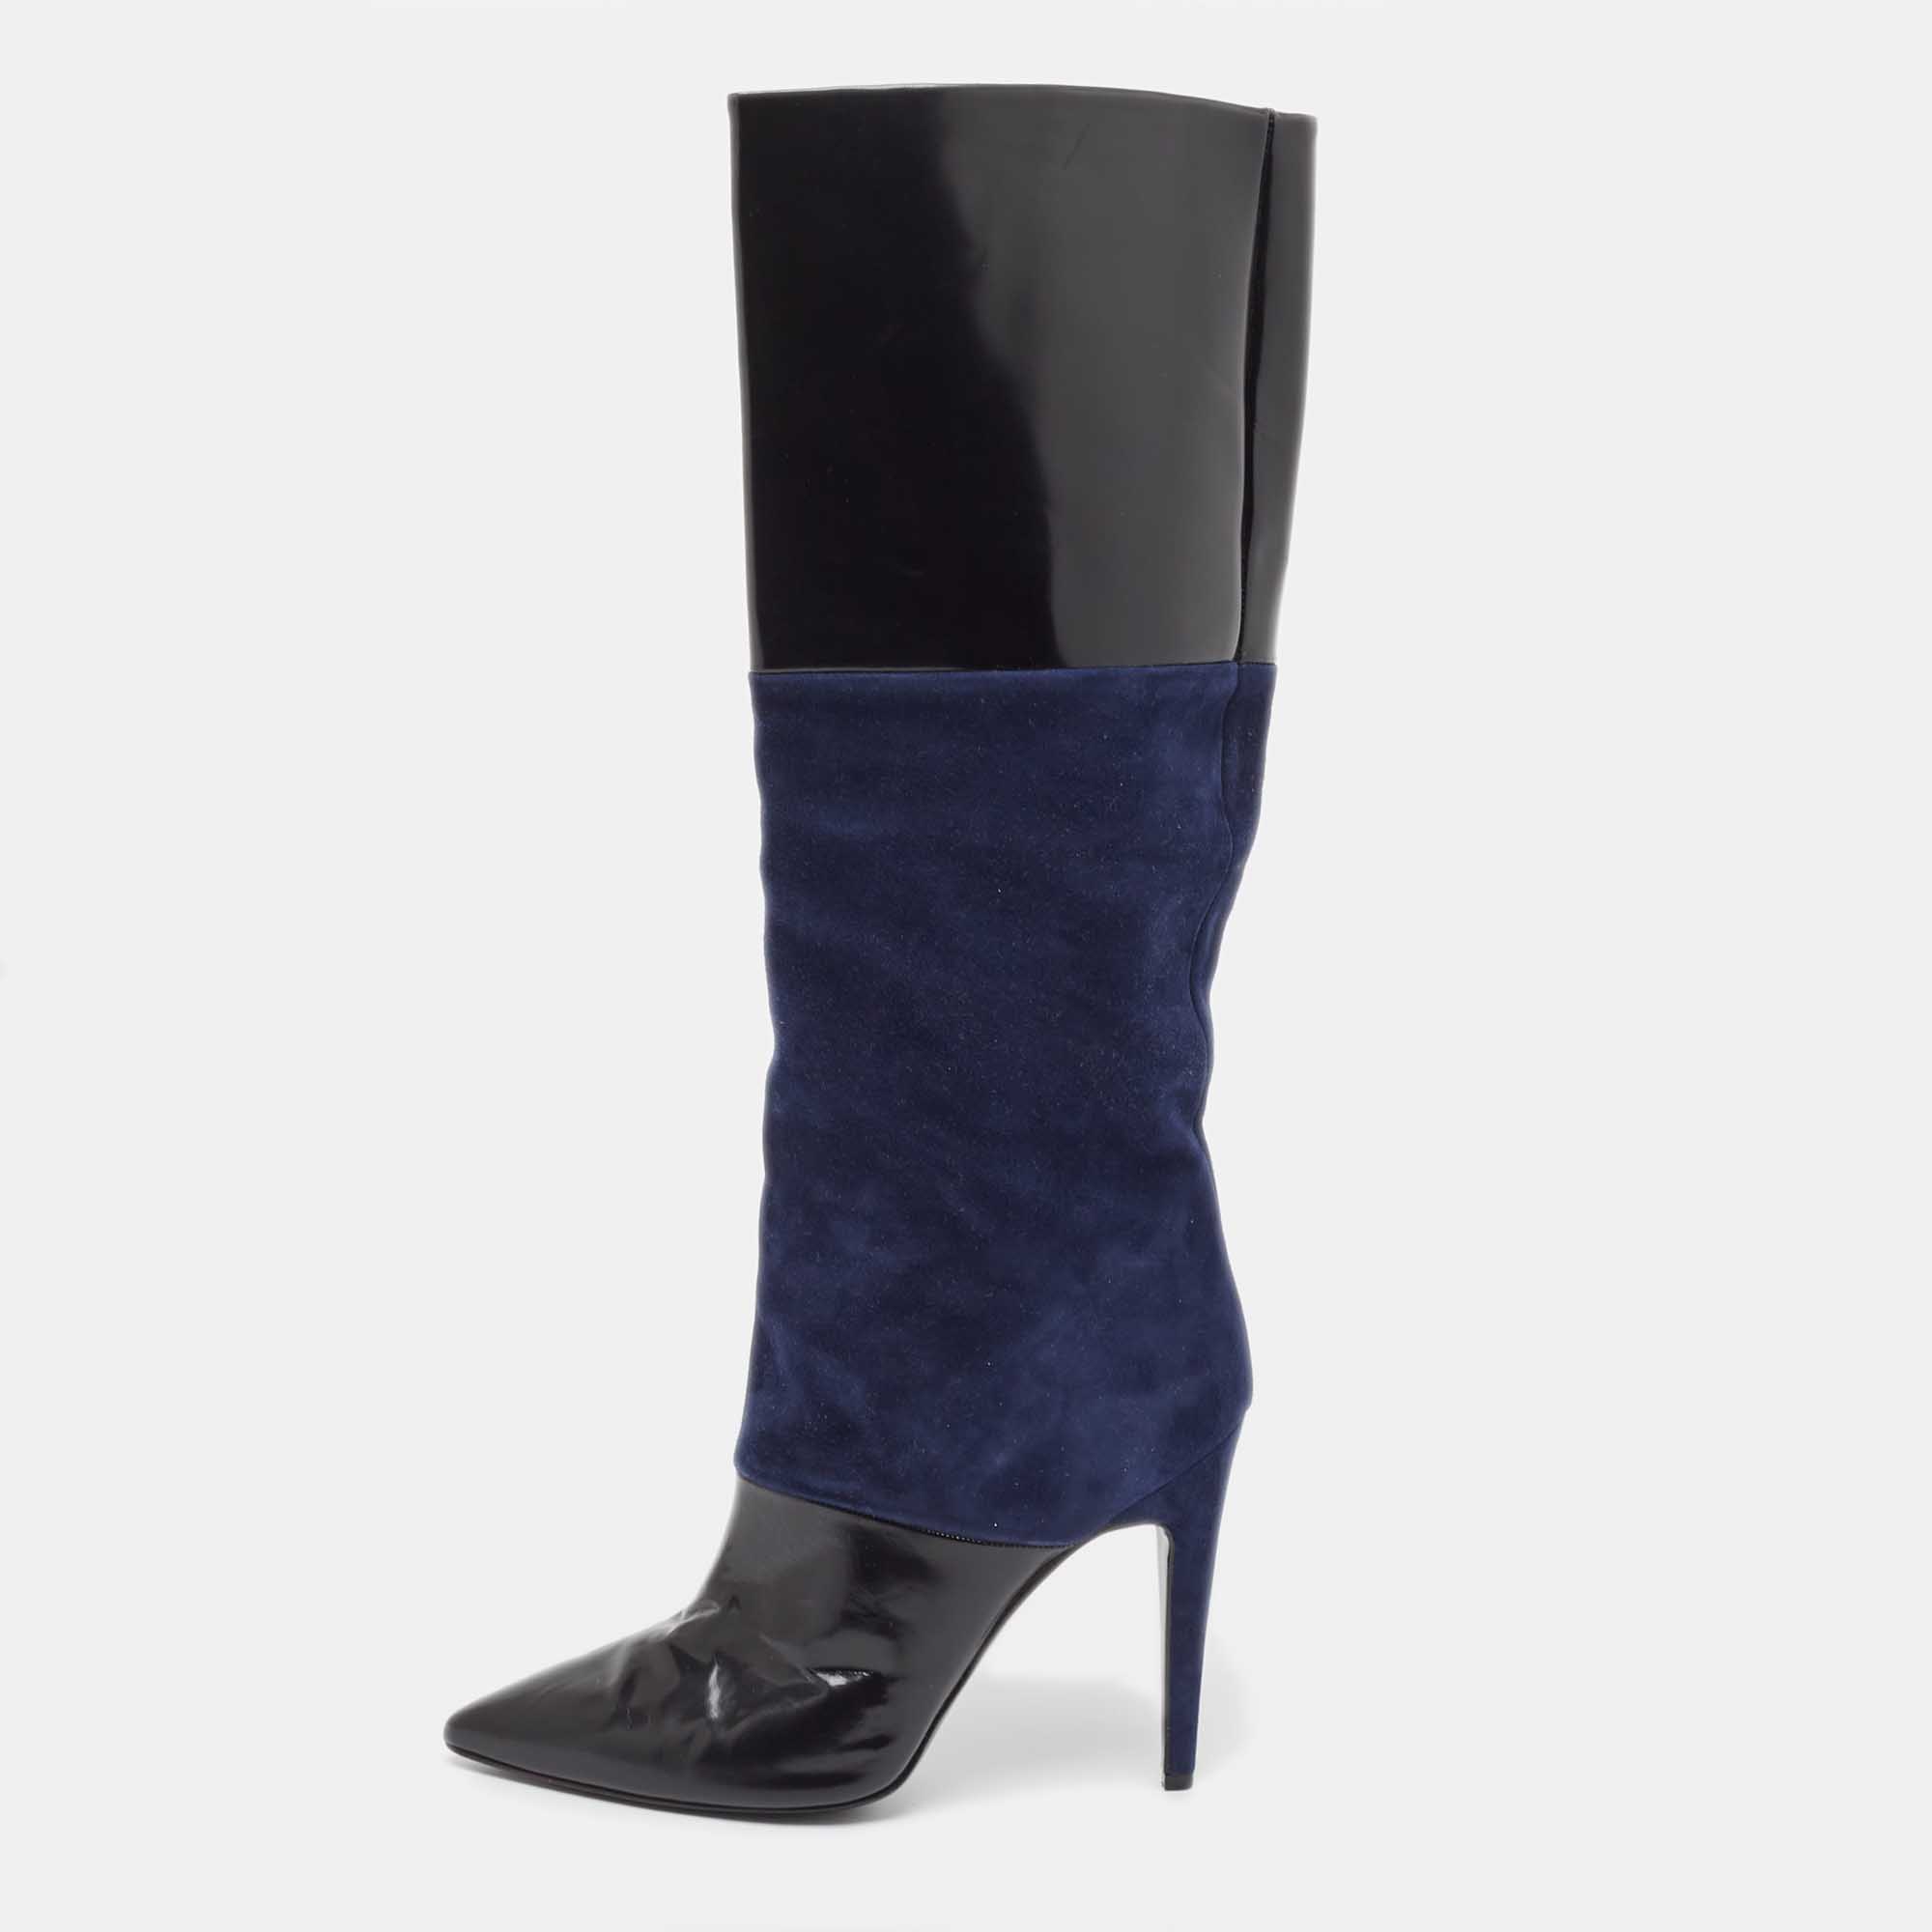 Pierre hardy  navy blue/black suede and patent knee length boots size 40